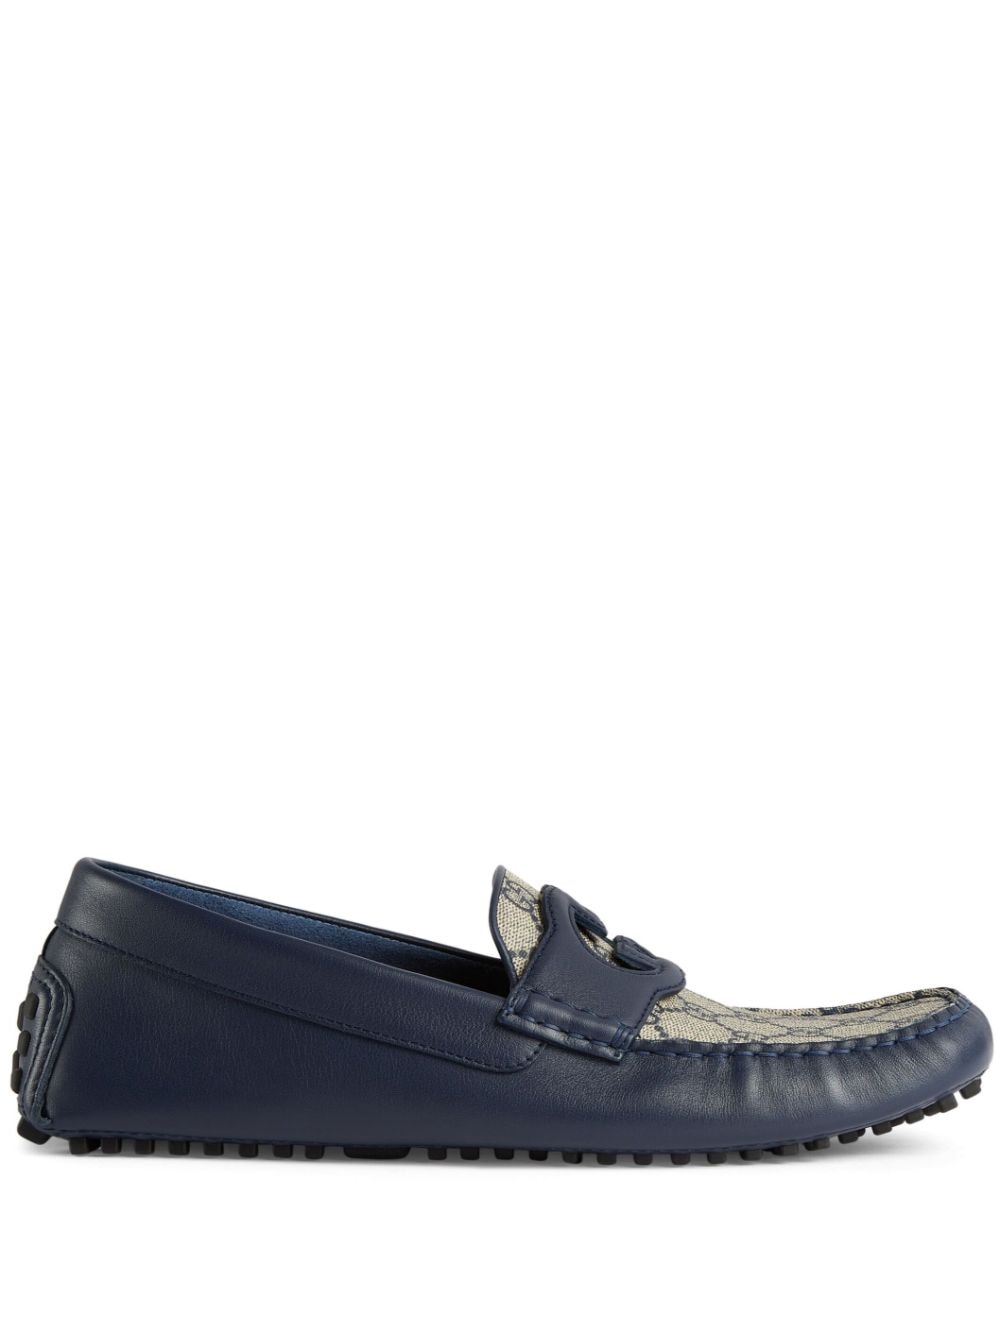 Gucci Interlocking G Driver Loafers In Blue | ModeSens